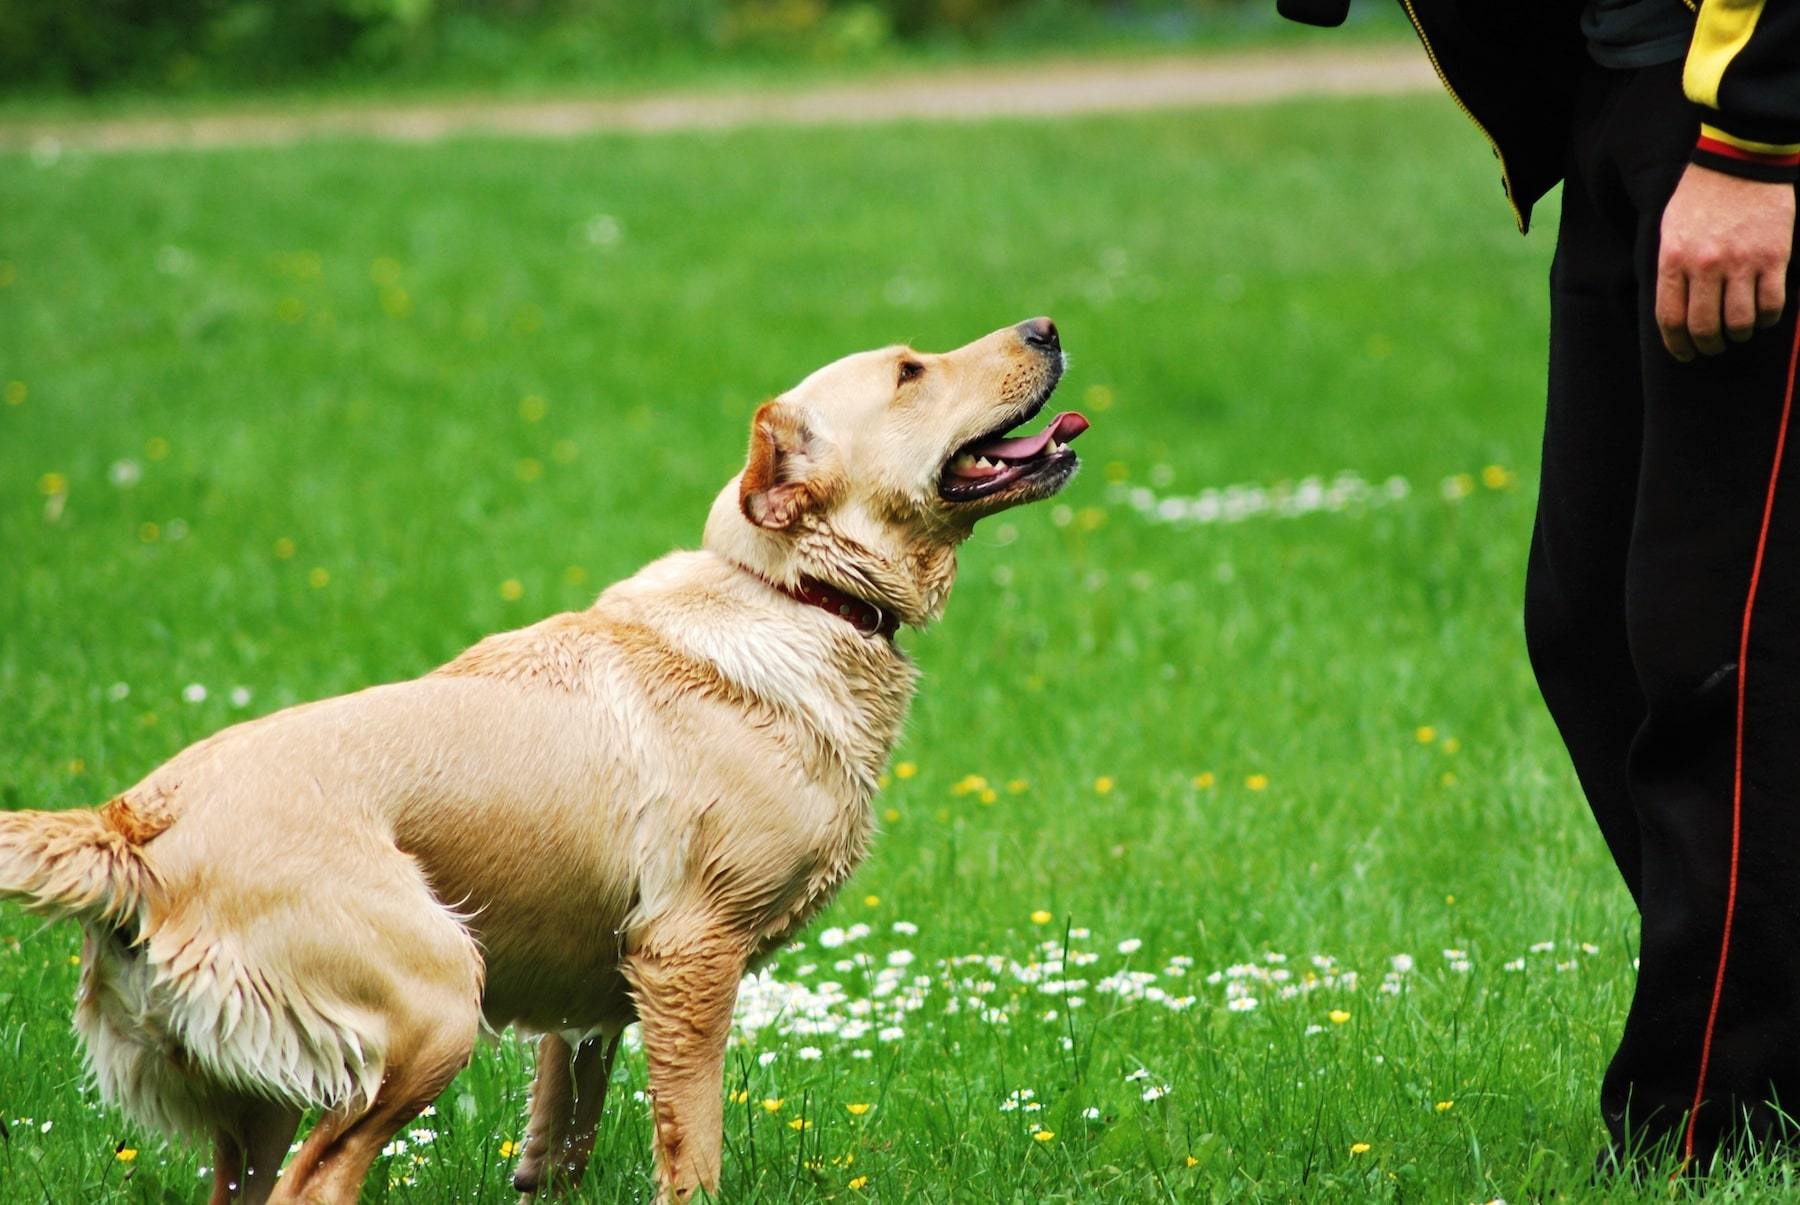 Training Recall: How to Teach Your Dog to Come When Called